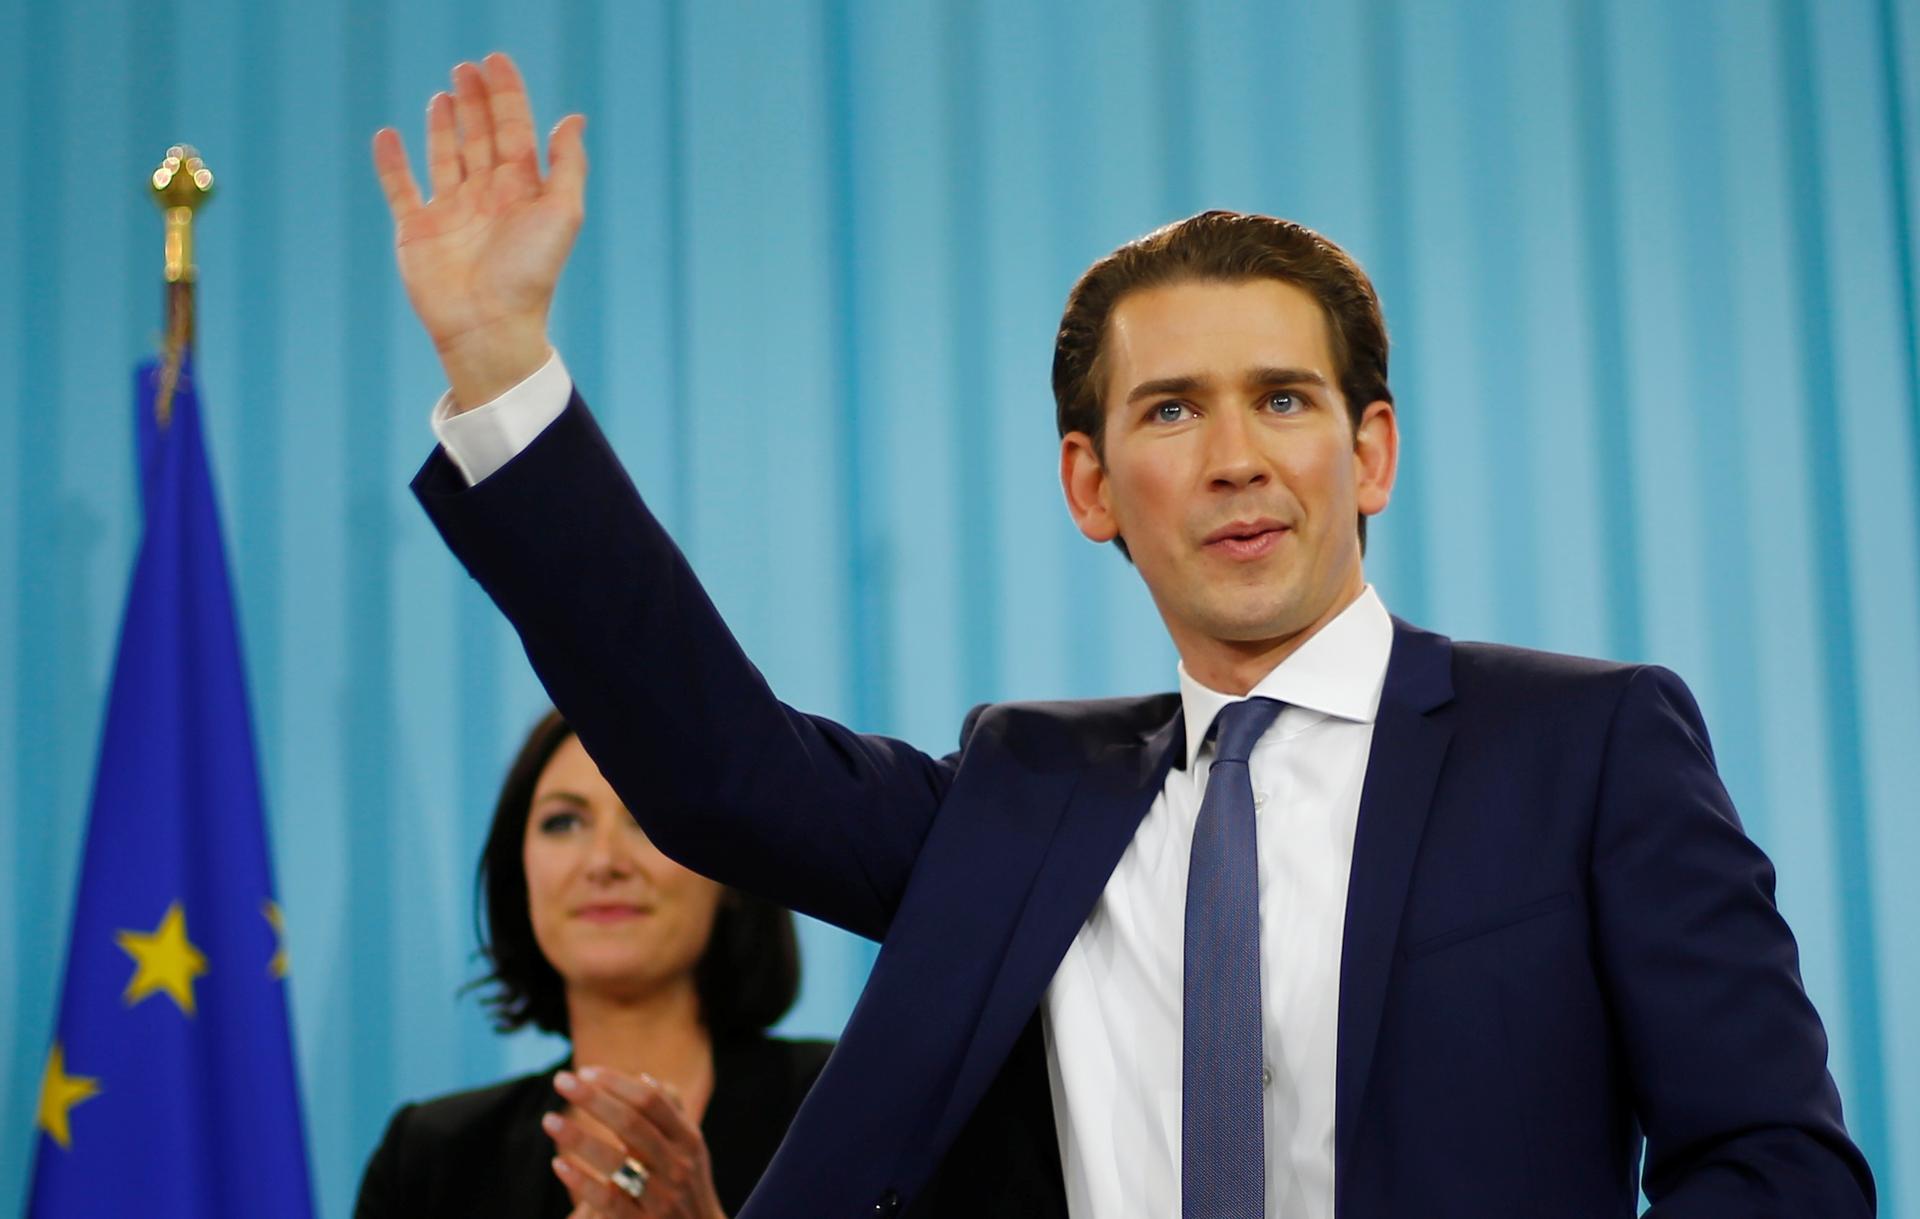 Top candidate of the People's Party (OeVP) Sebastian Kurz attends his party's victory celebration meeting in Vienna, Austria, Oct. 15, 2017.